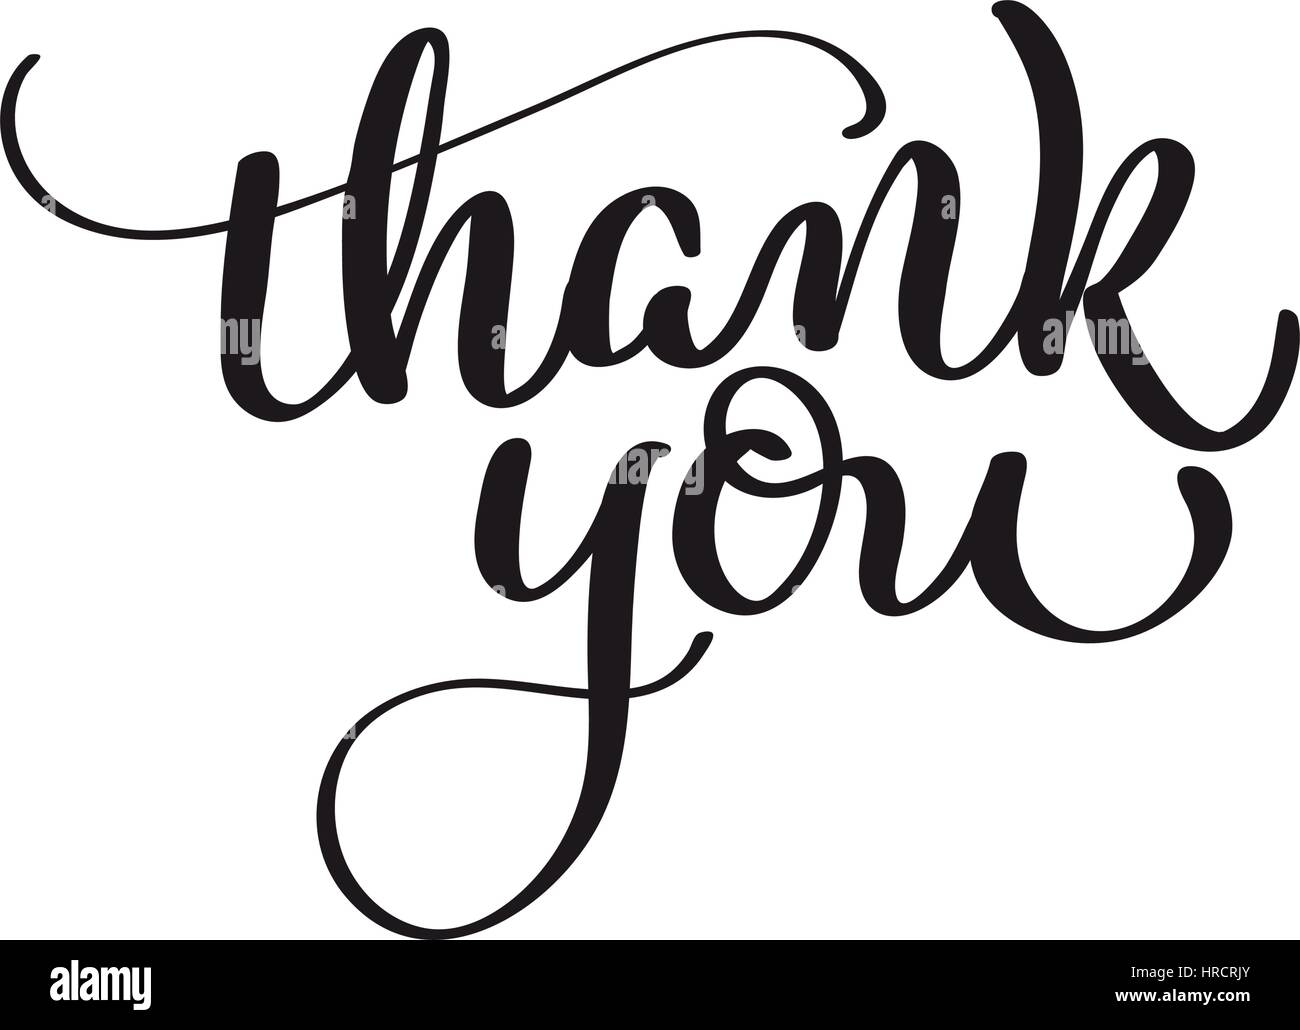 Thank you text isolated on white background. calligraphy and lettering Stock Vector